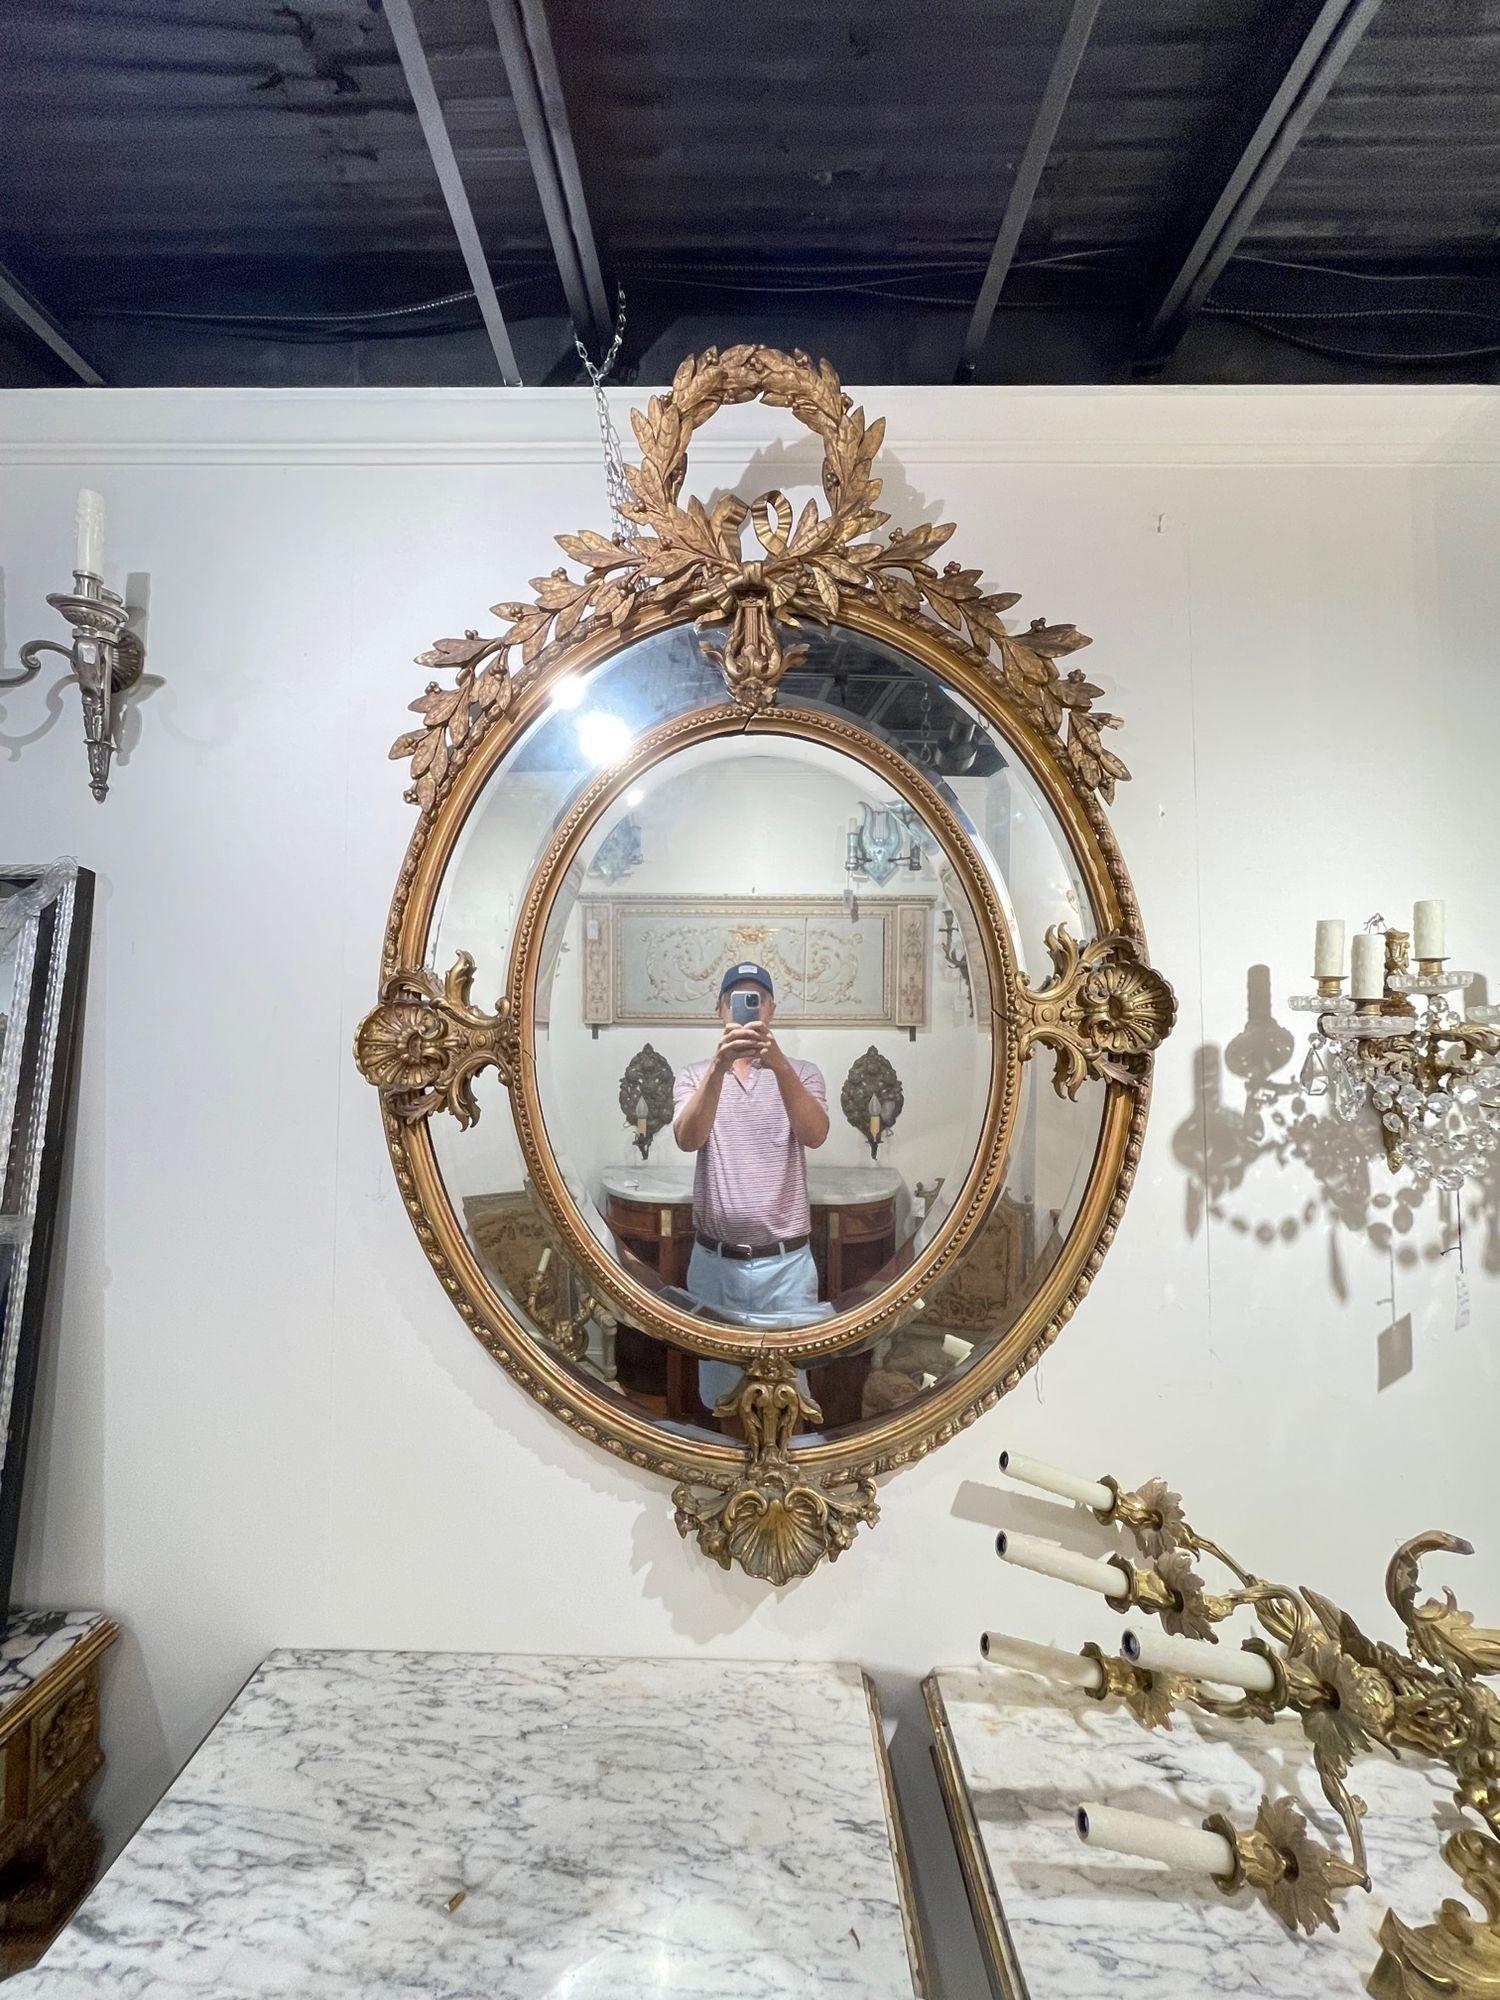 Gorgeous 19th century French Louis XVI style carved and giltwood mirror. This piece has exceptional carvings including an elaborate crest and leaves at the top. Truly special!